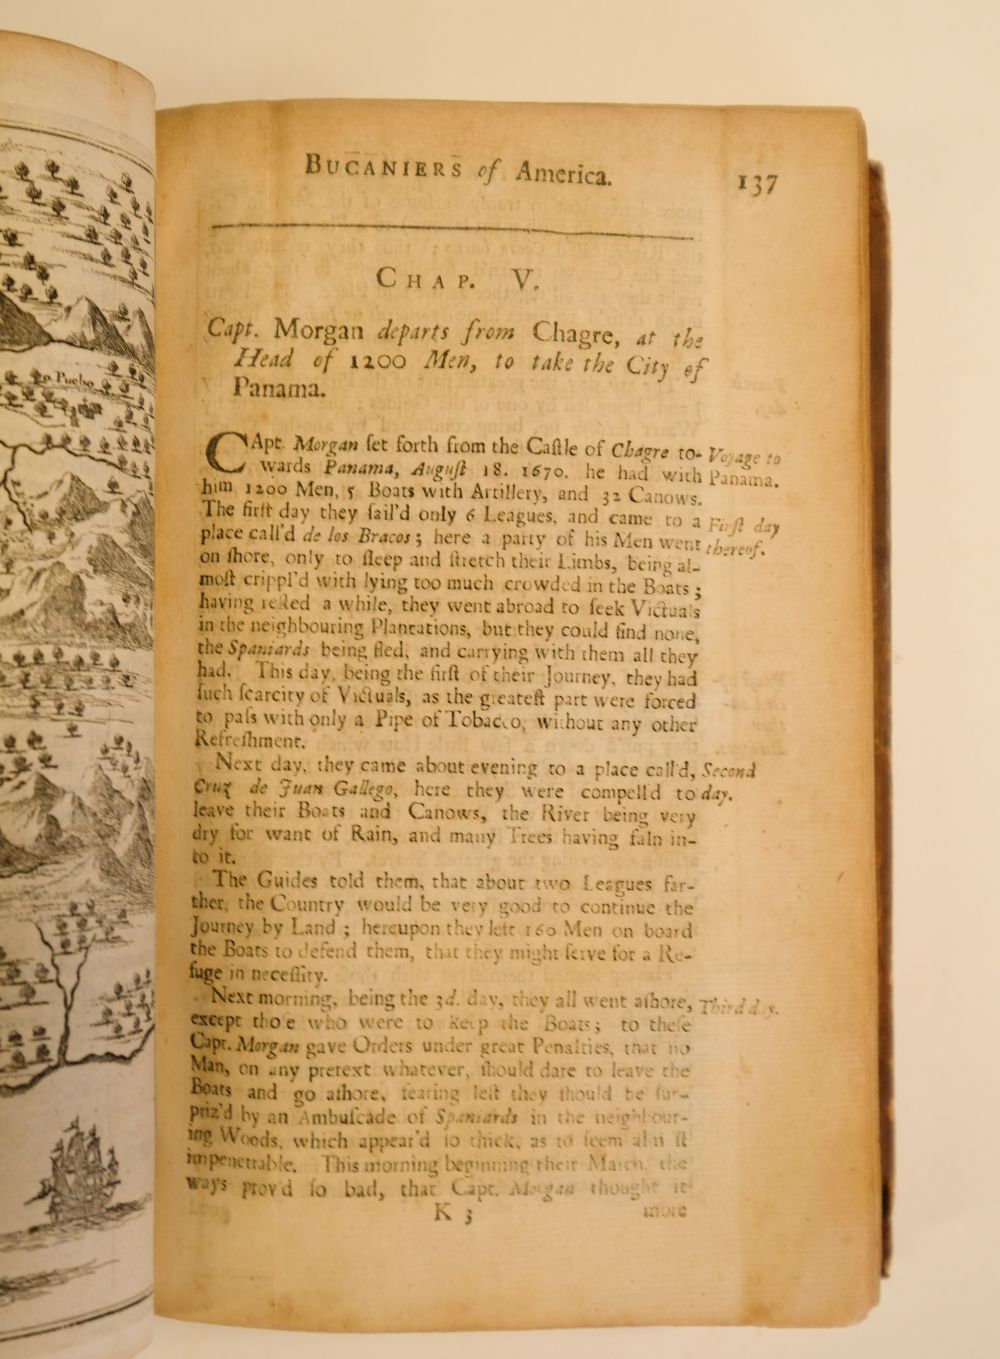 Exquemelin (Alexandre). The History of the Bucaniers of America, 1704 - Image 8 of 11